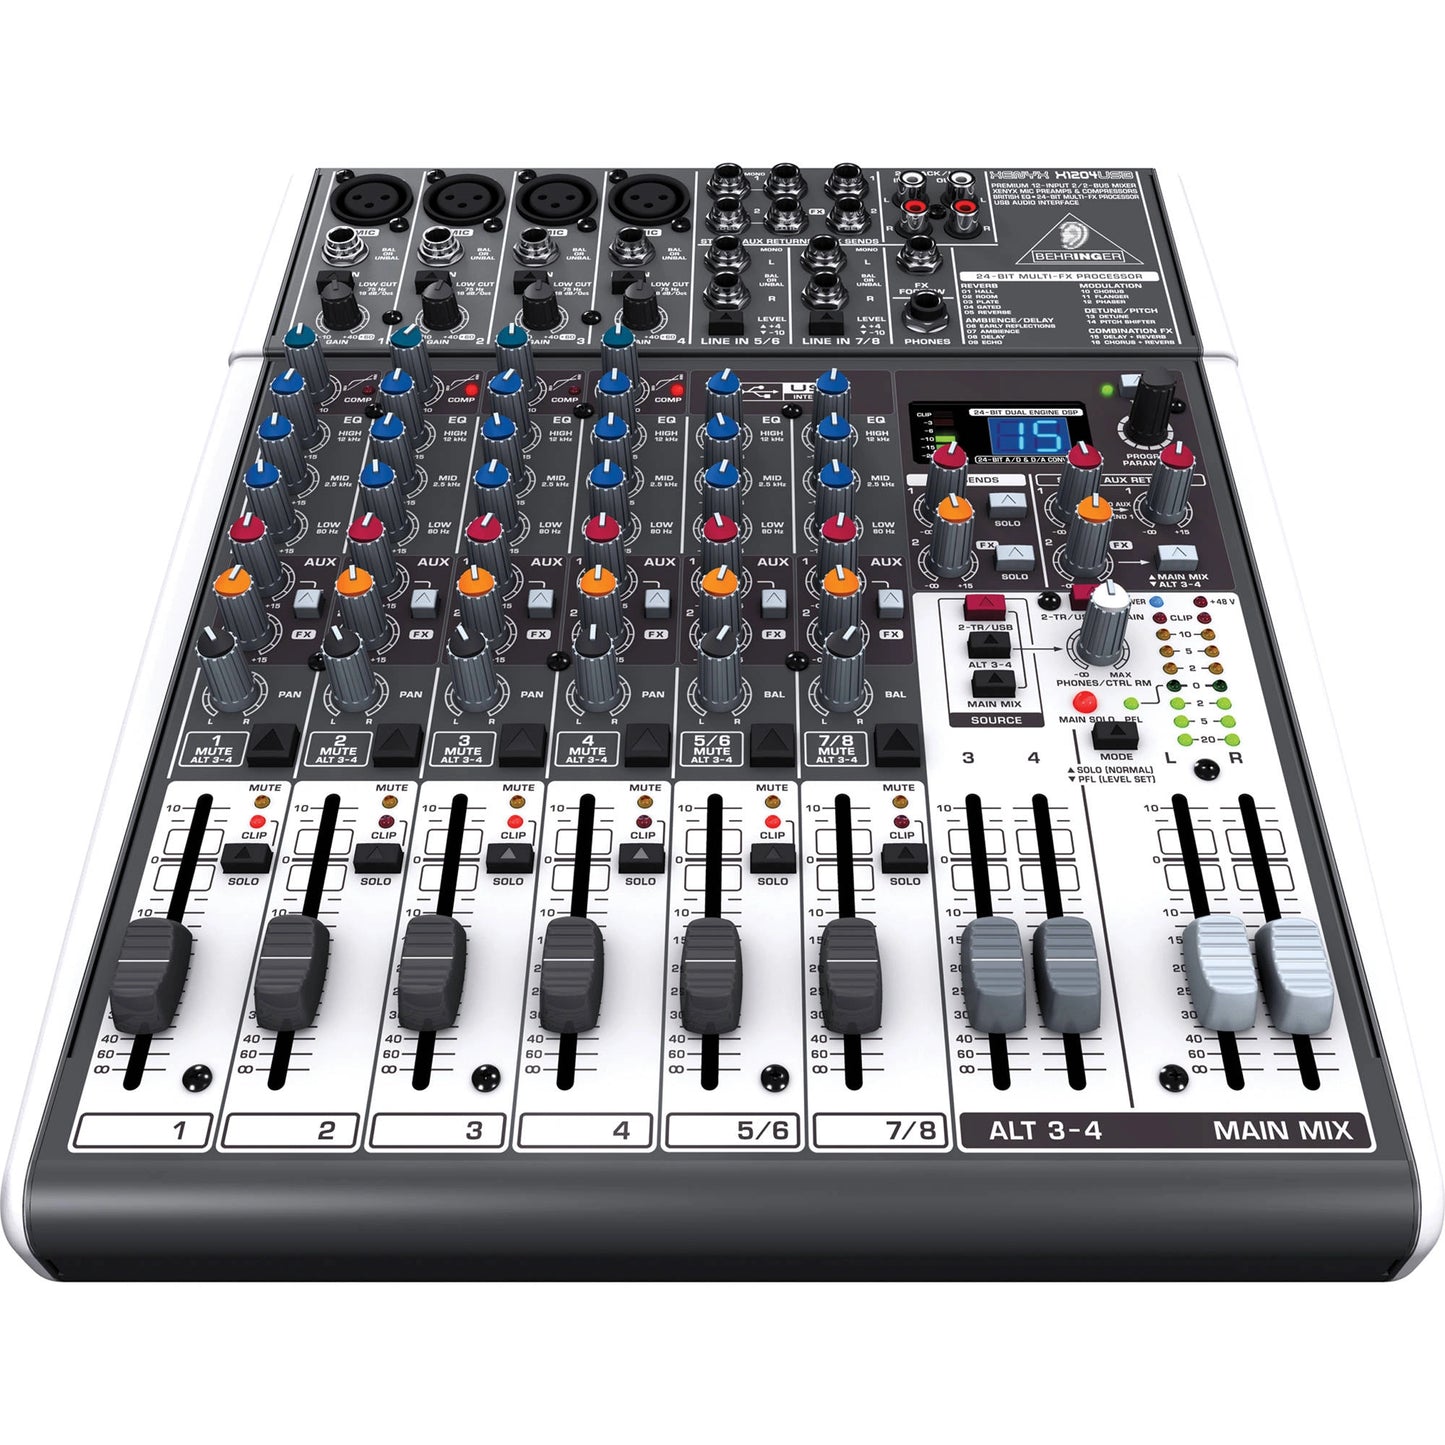 BEHRINGER XENYX X1204USB 12-Input Mixer With USB & Effect